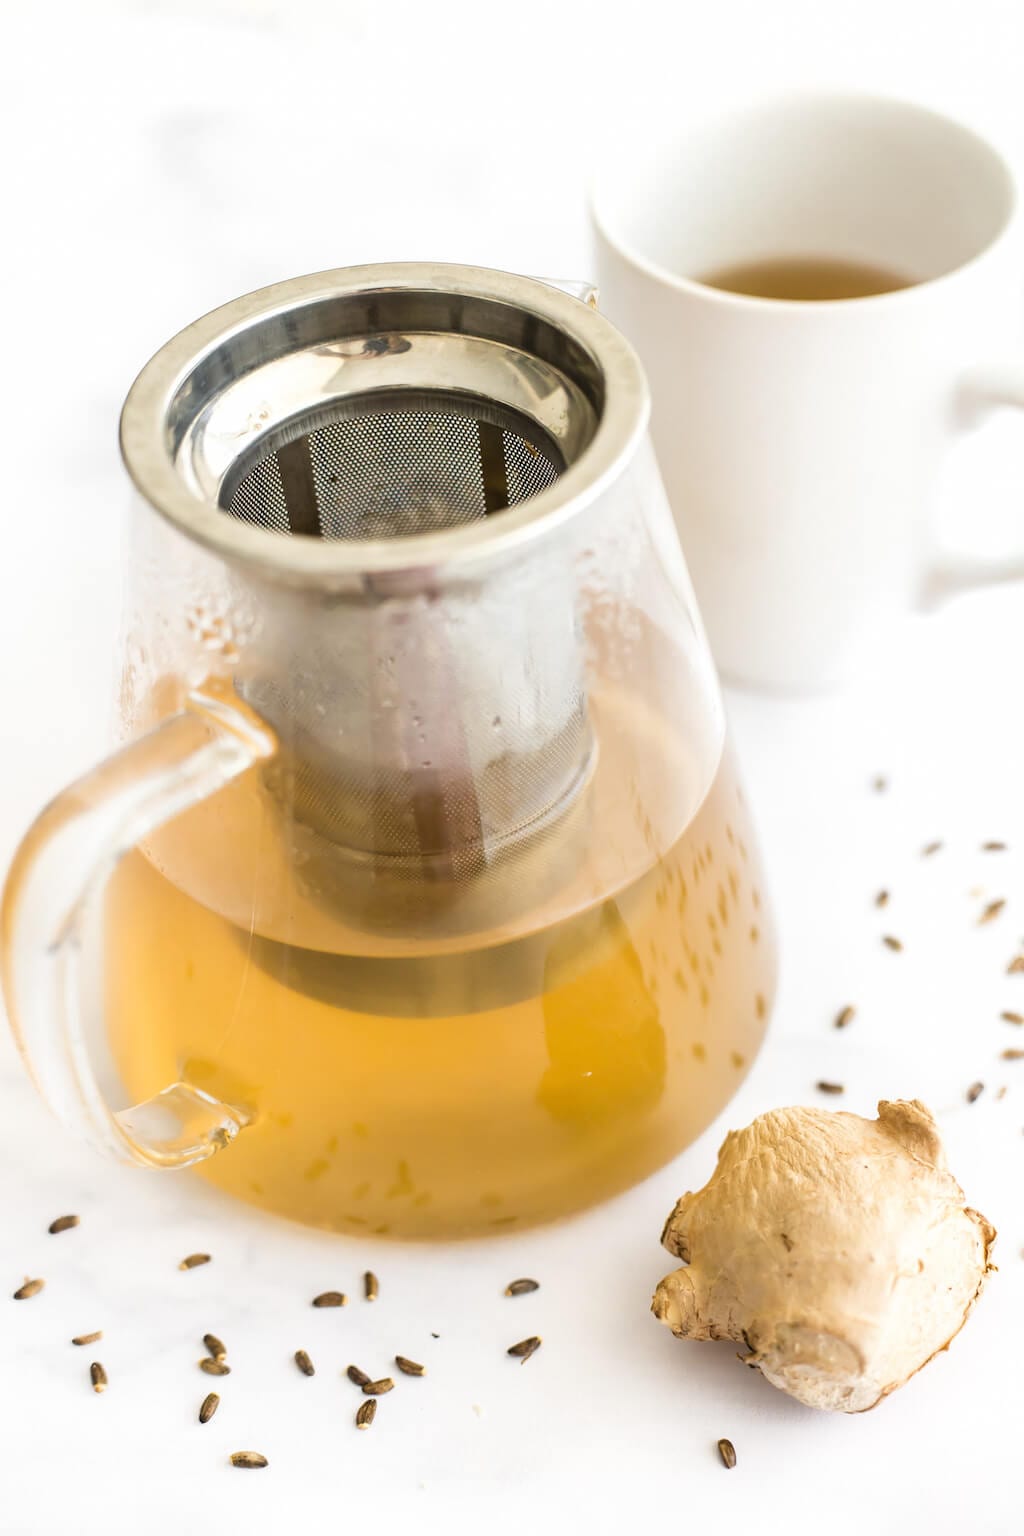 Learn how to make Milk Thistle Ginger Tea to Help Your Liver